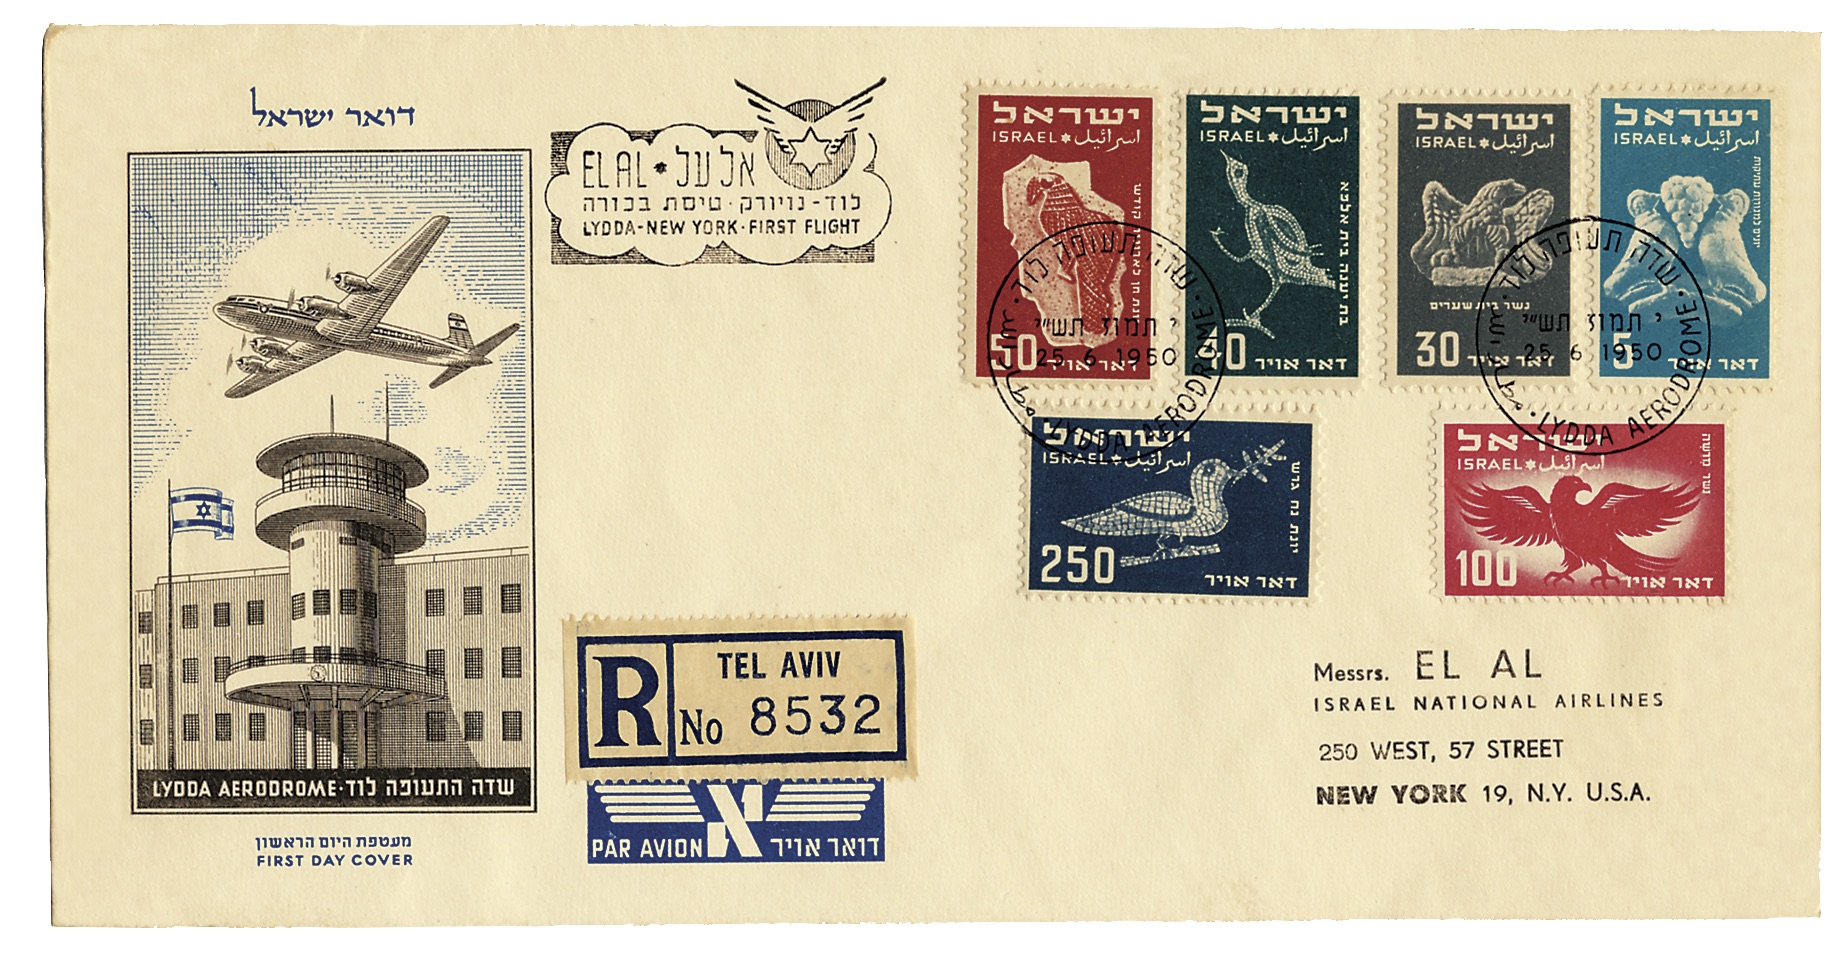 Flight cover flown on EL AL's first 'official' passenger charter flight to the United States. The DC-4 left Tel Aviv on 25 June 1950, arriving at Idlewild Airport, New York on 27 June following stops in Rome, Italy; Shannon, Ireland; and Gander, Newfoundland. (MG collection via Stanley Baumwald)